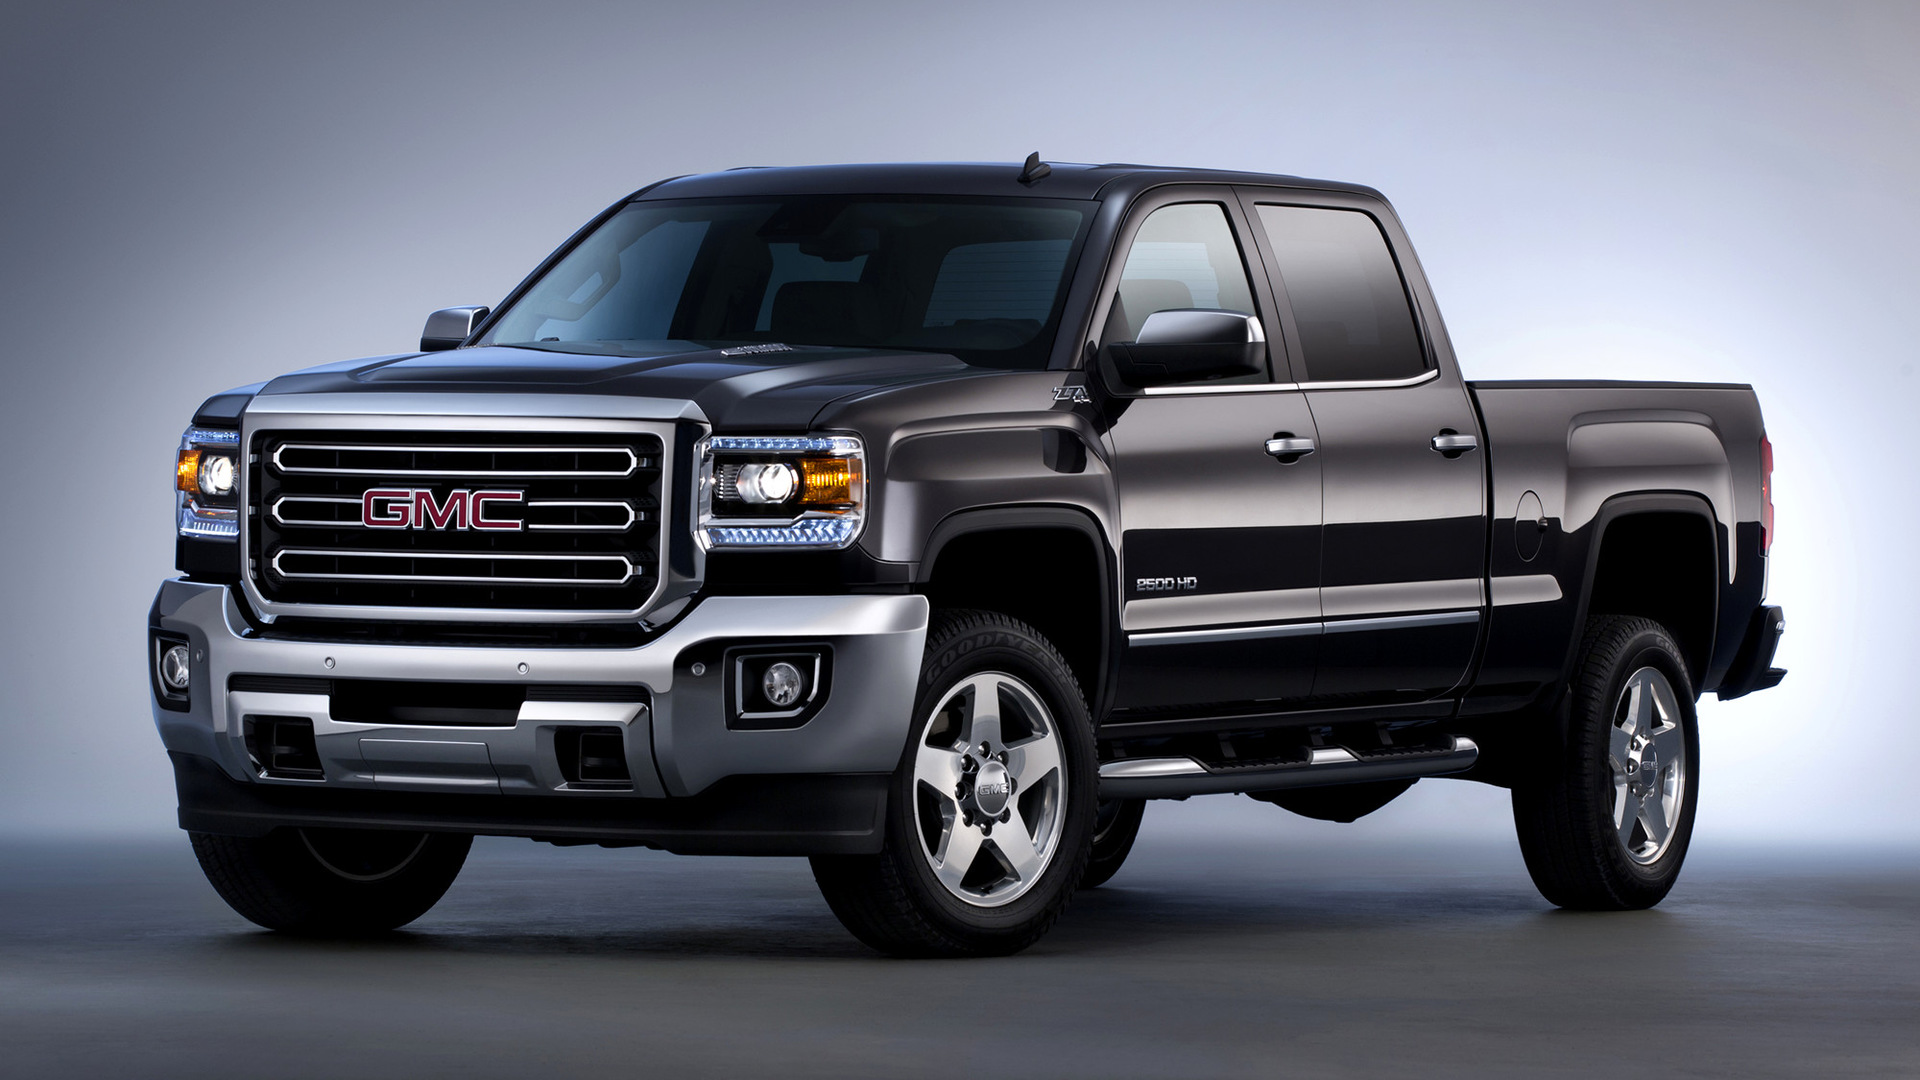 Gmc Sierra 2500 Hd Slt Crew Cab 2015 Wallpapers And Hd Images Car Pixel